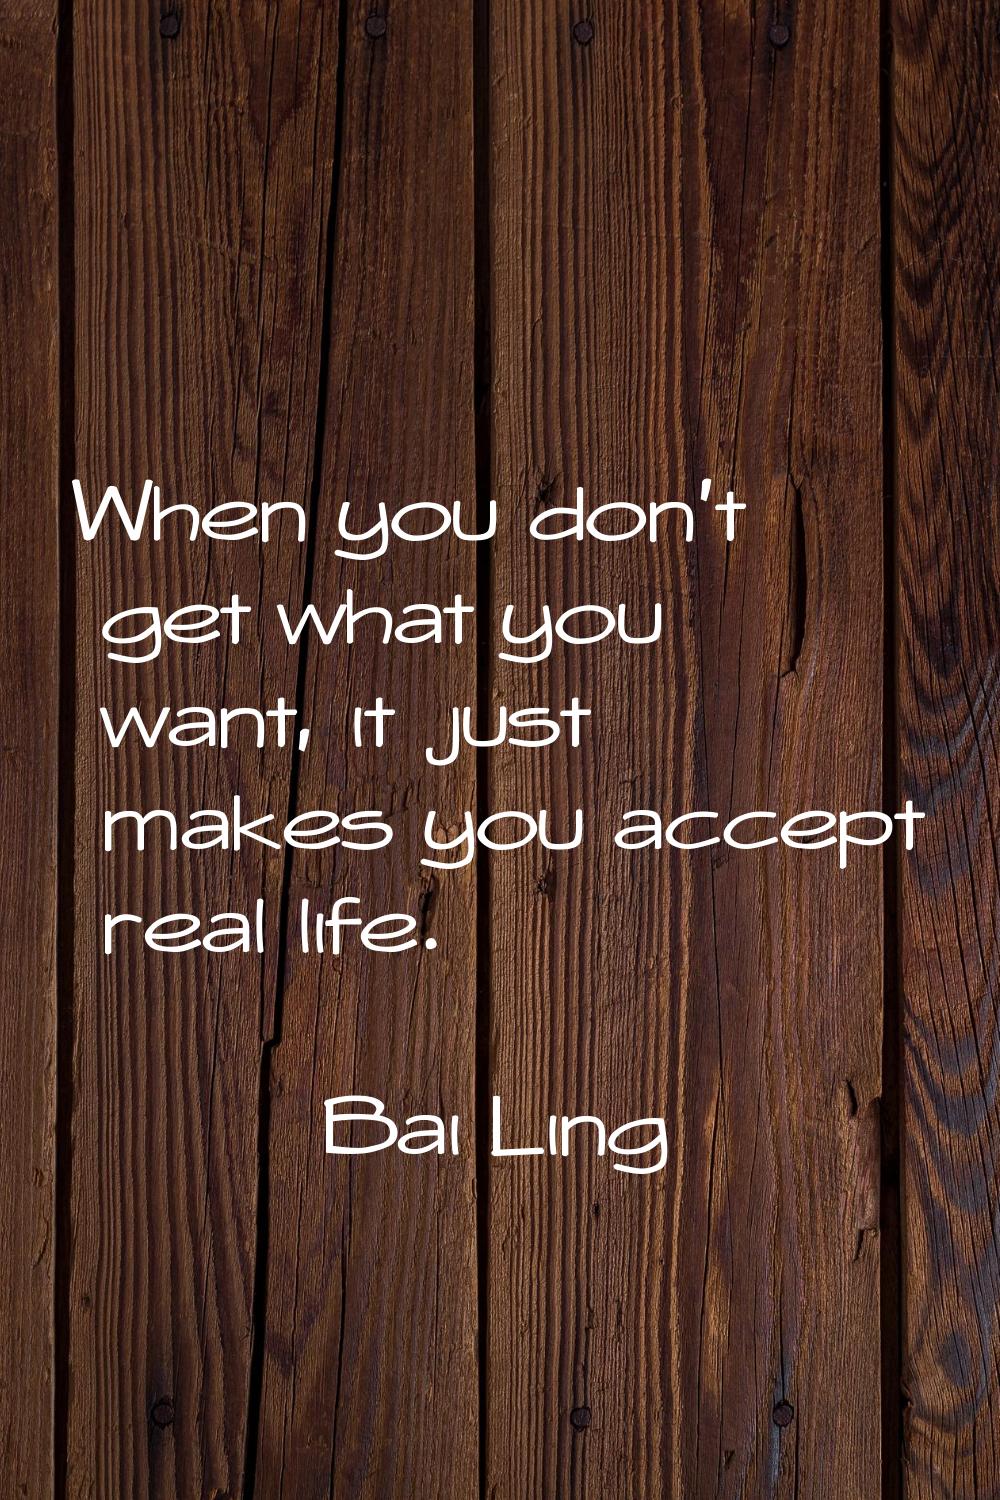 When you don't get what you want, it just makes you accept real life.